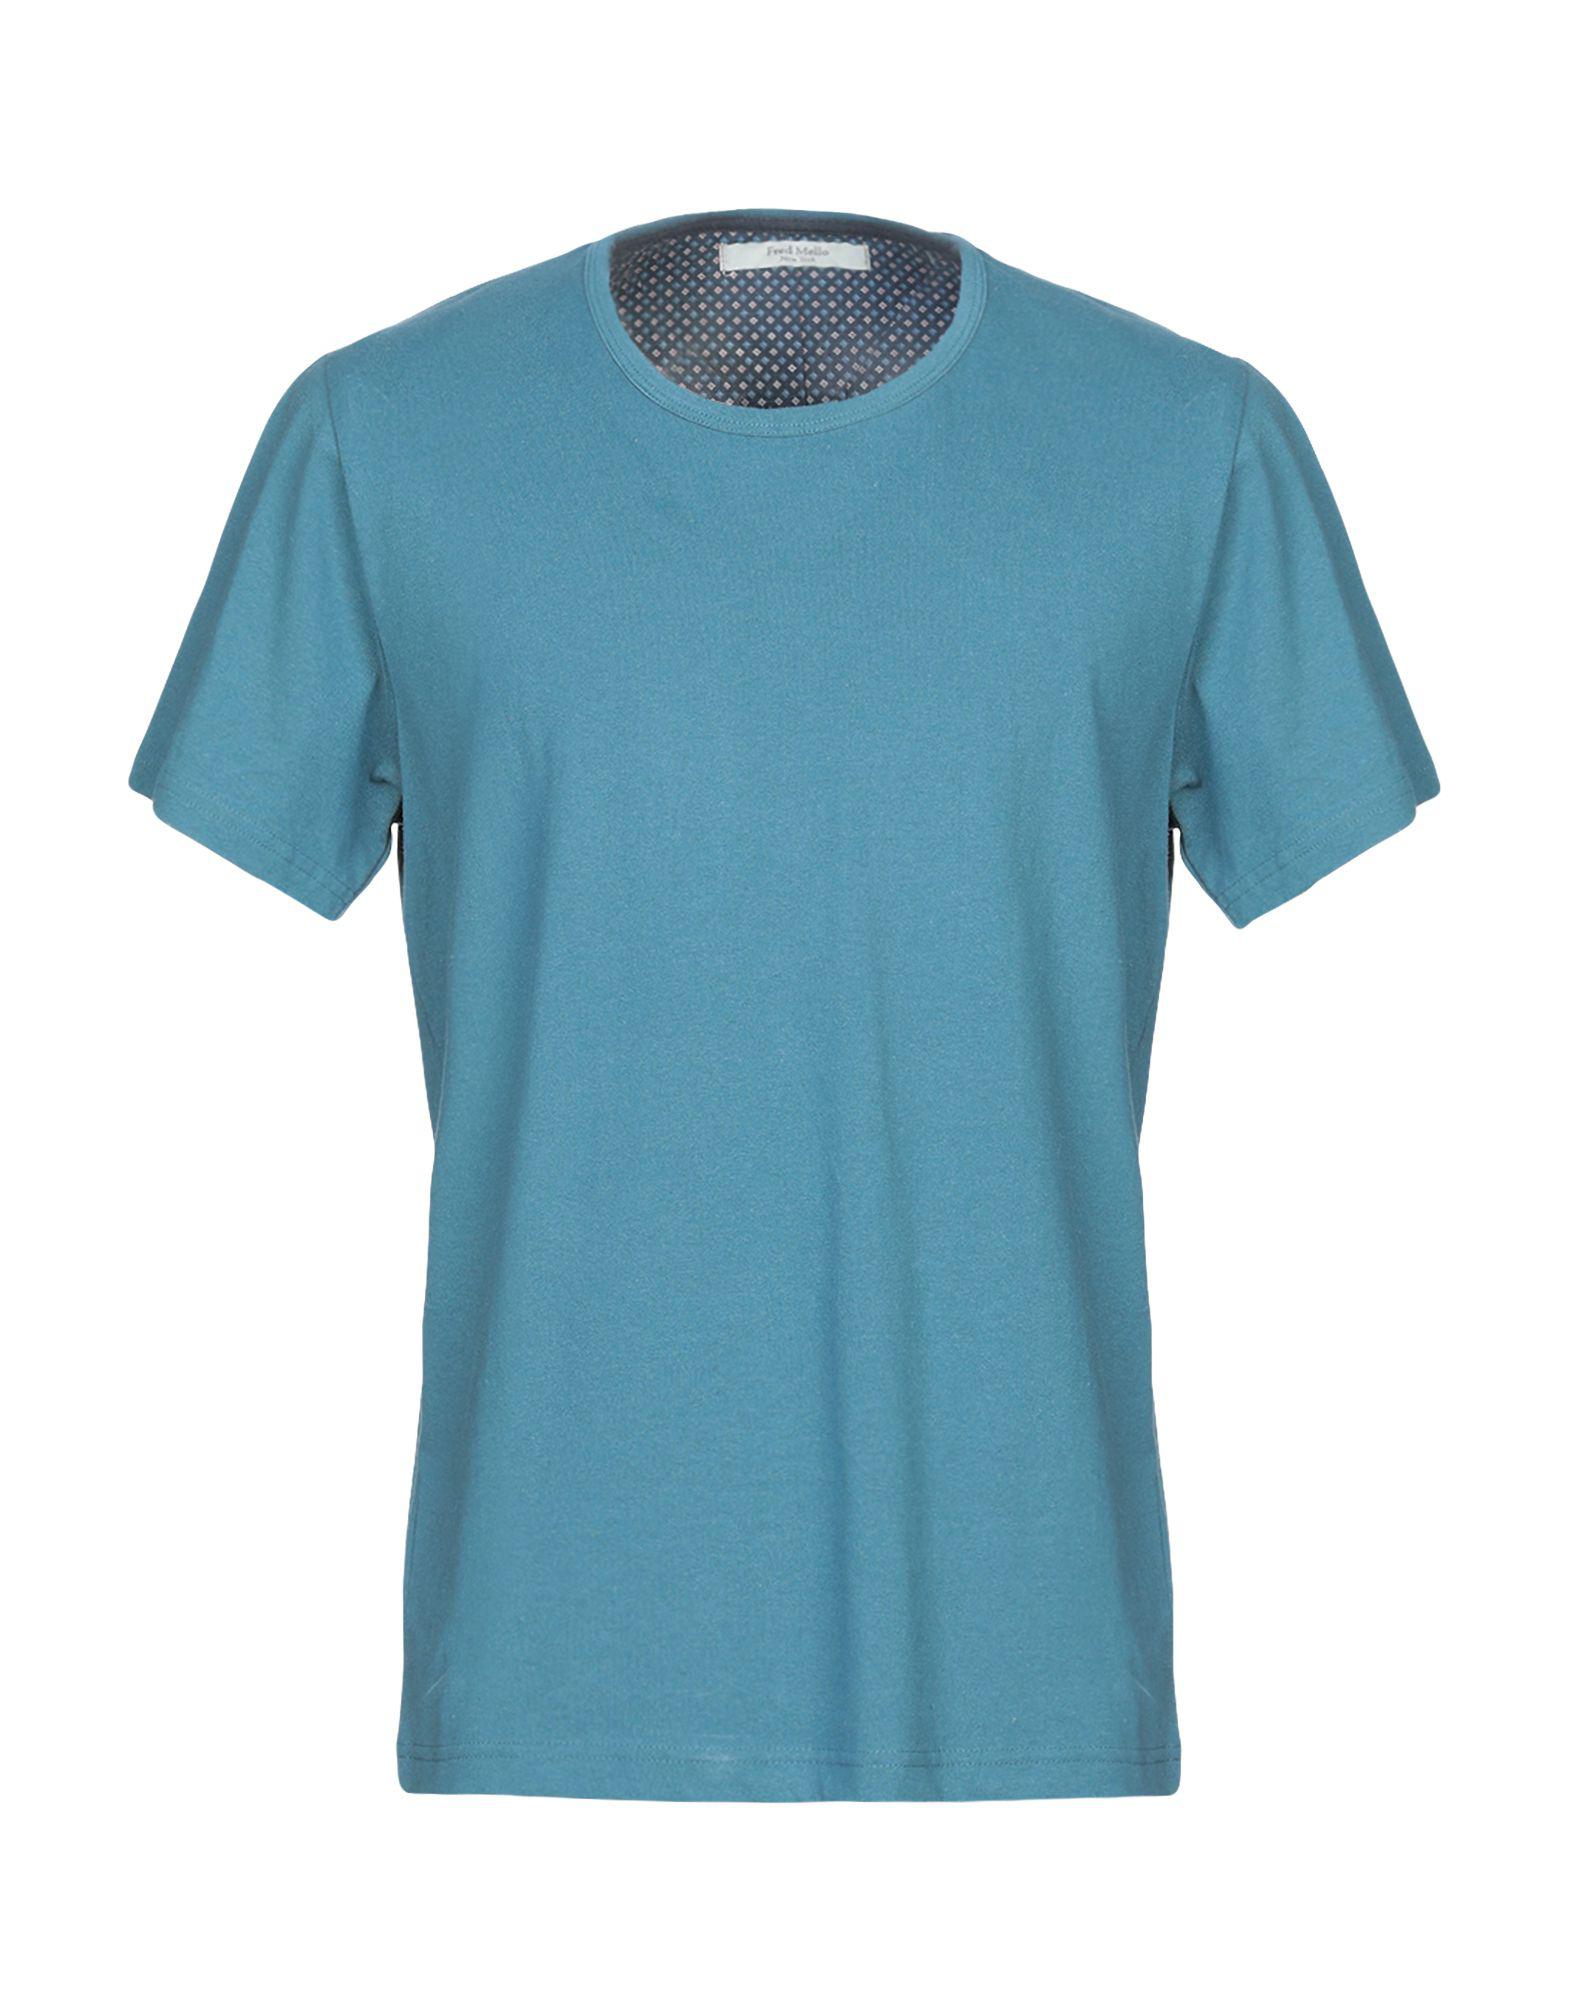 Fred Mello T-shirt in Blue for Men - Lyst